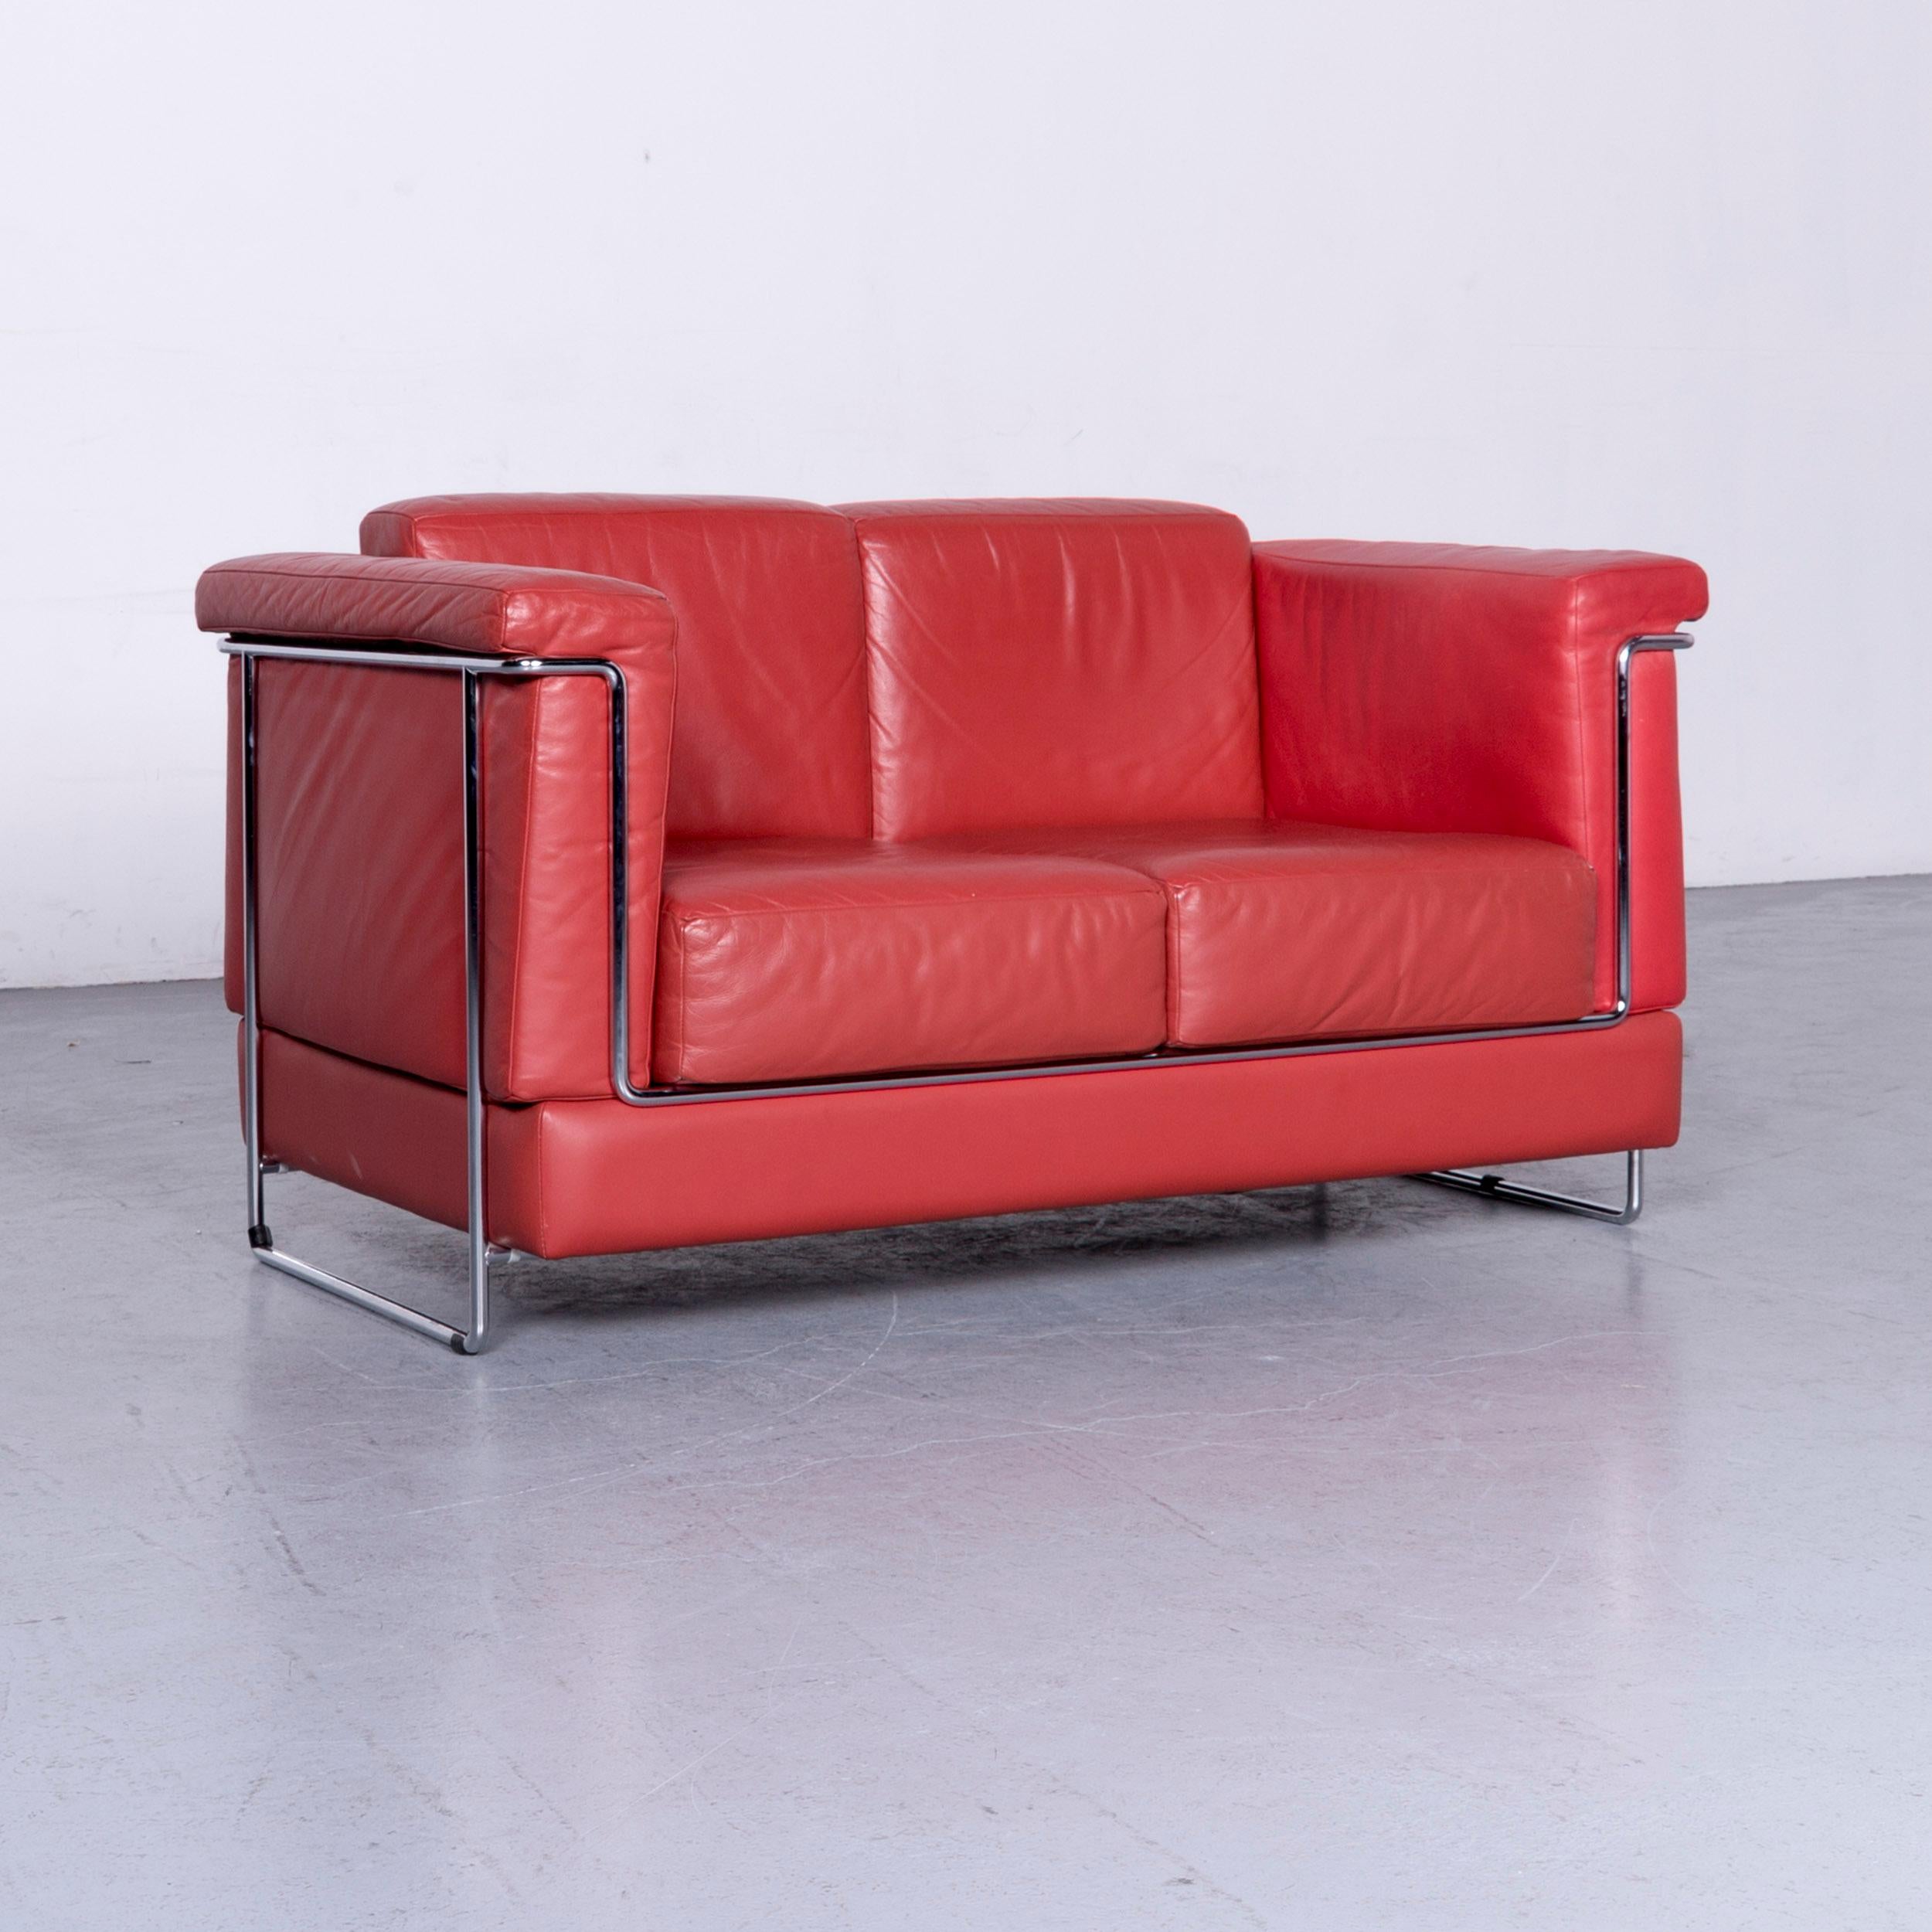 German Züco Carat Designer Leather Sofa Set Red Two-Seat Couch